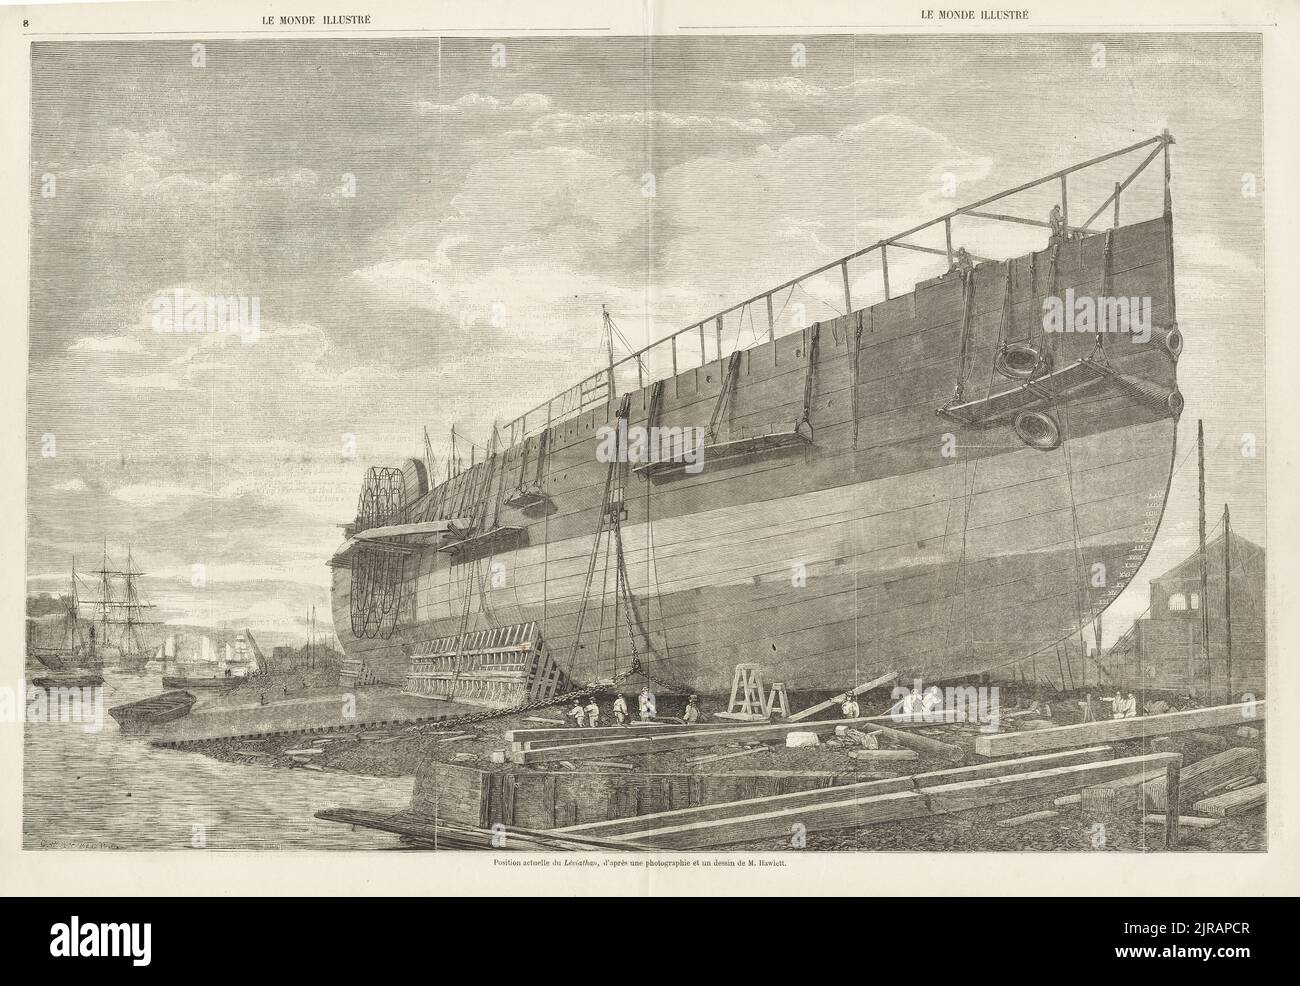 Woodcut print based on a photograph of the Leviathan, an iron sail-powered, paddle wheel and screw-propelled steamship, later known as the SS Great Eastern, under construction, November 12, 1857. Photography by Robert Howlett (1831 - 1858). Stock Photo